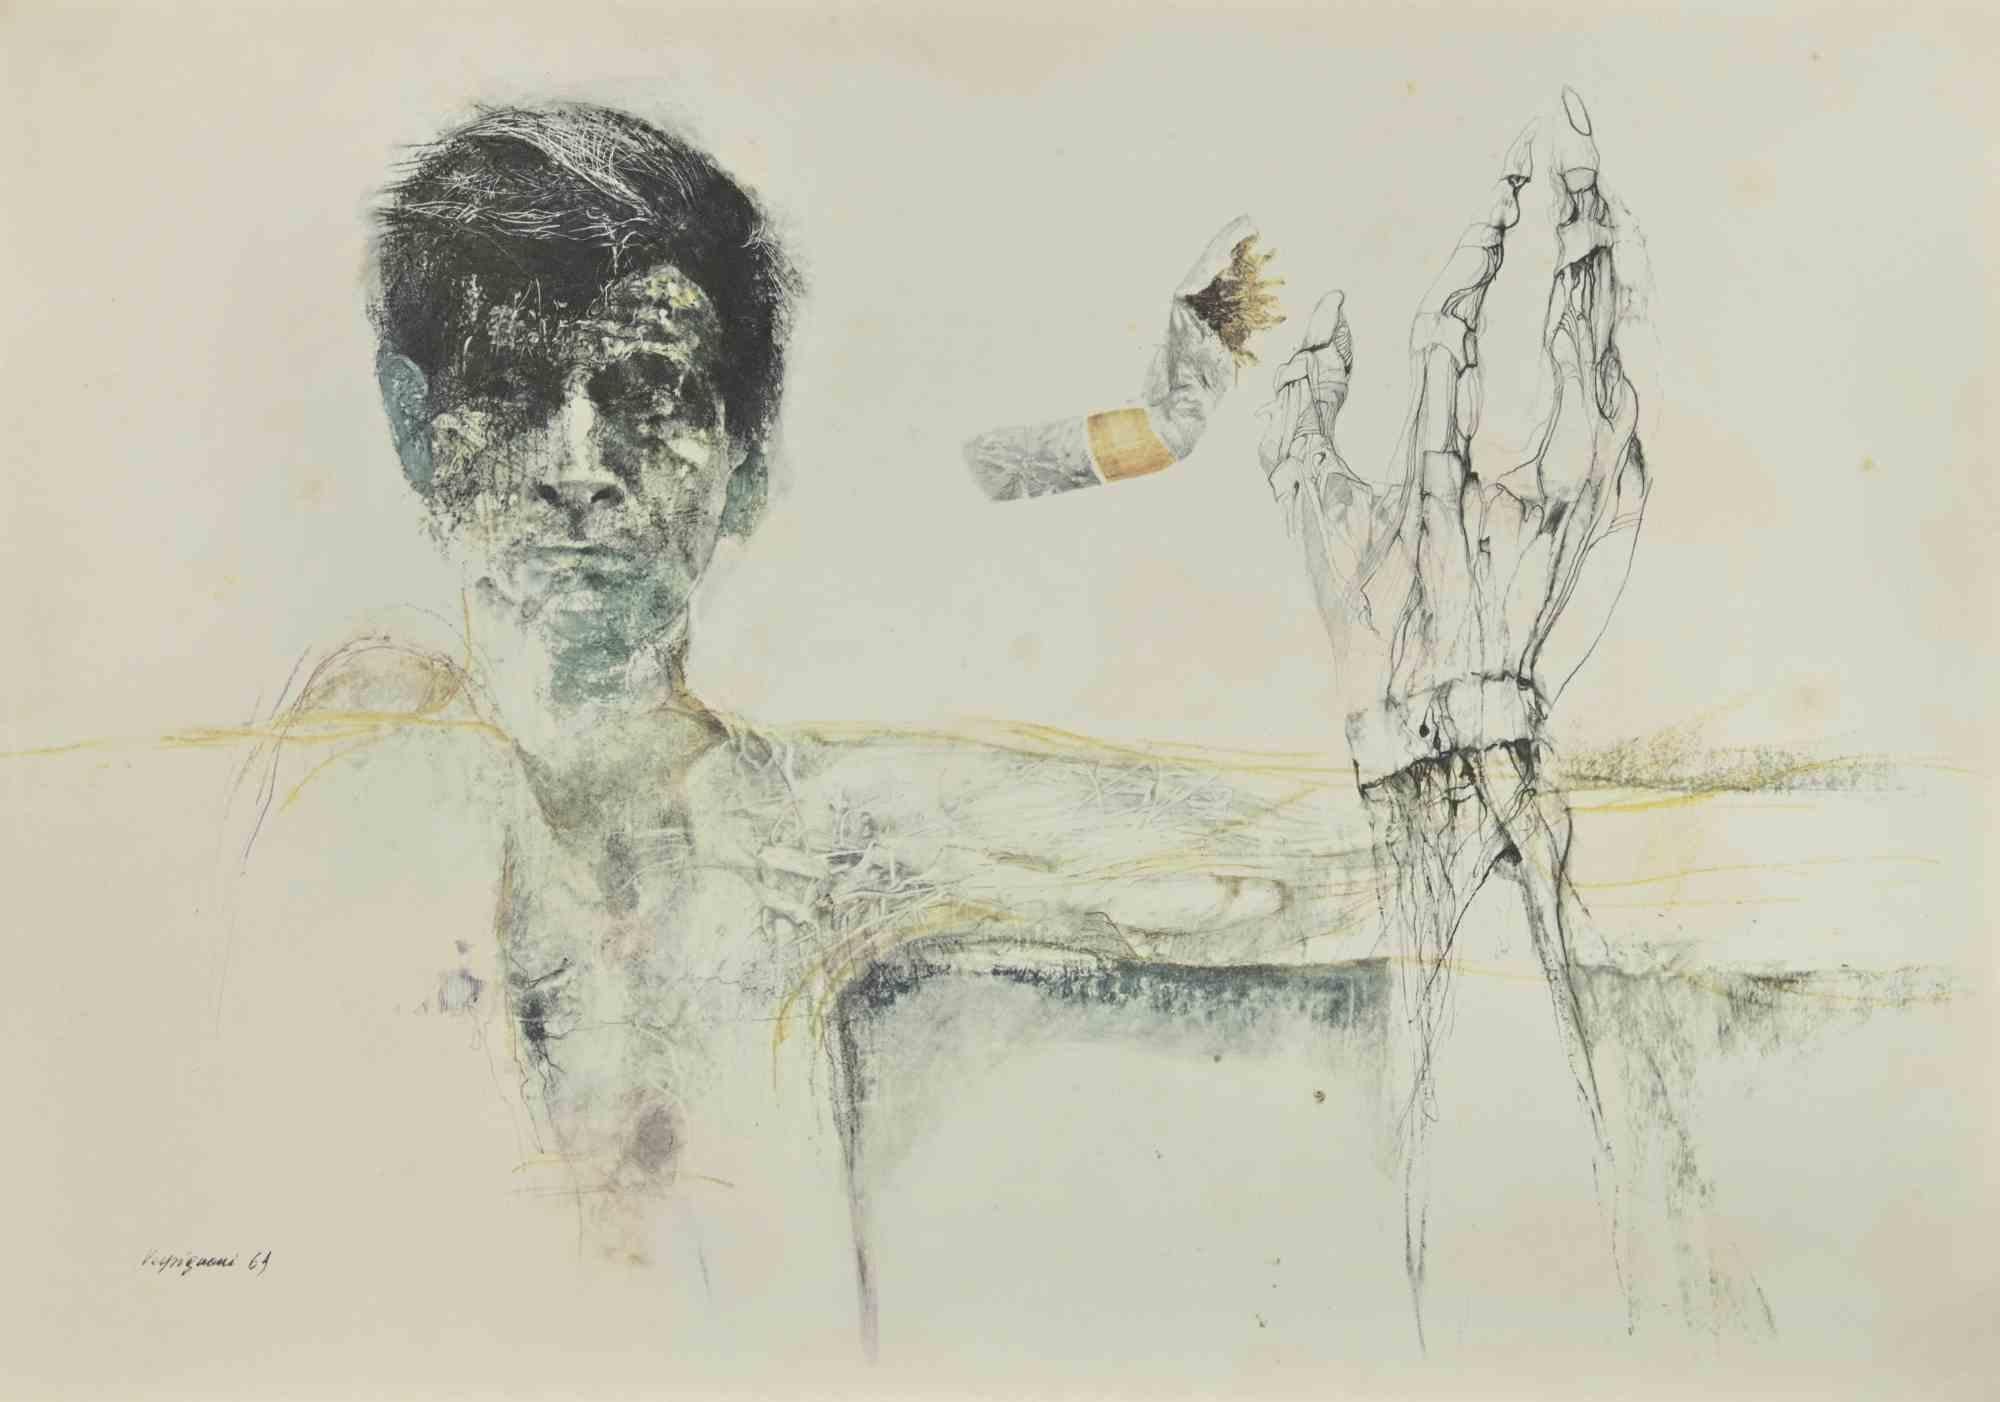 Figure is a phototype print reproducing drawing by Renzo Vespignani of the 1960s

Signed on the plate lower right.

The artwork is depicted through strong strokes and perfect hatchings.